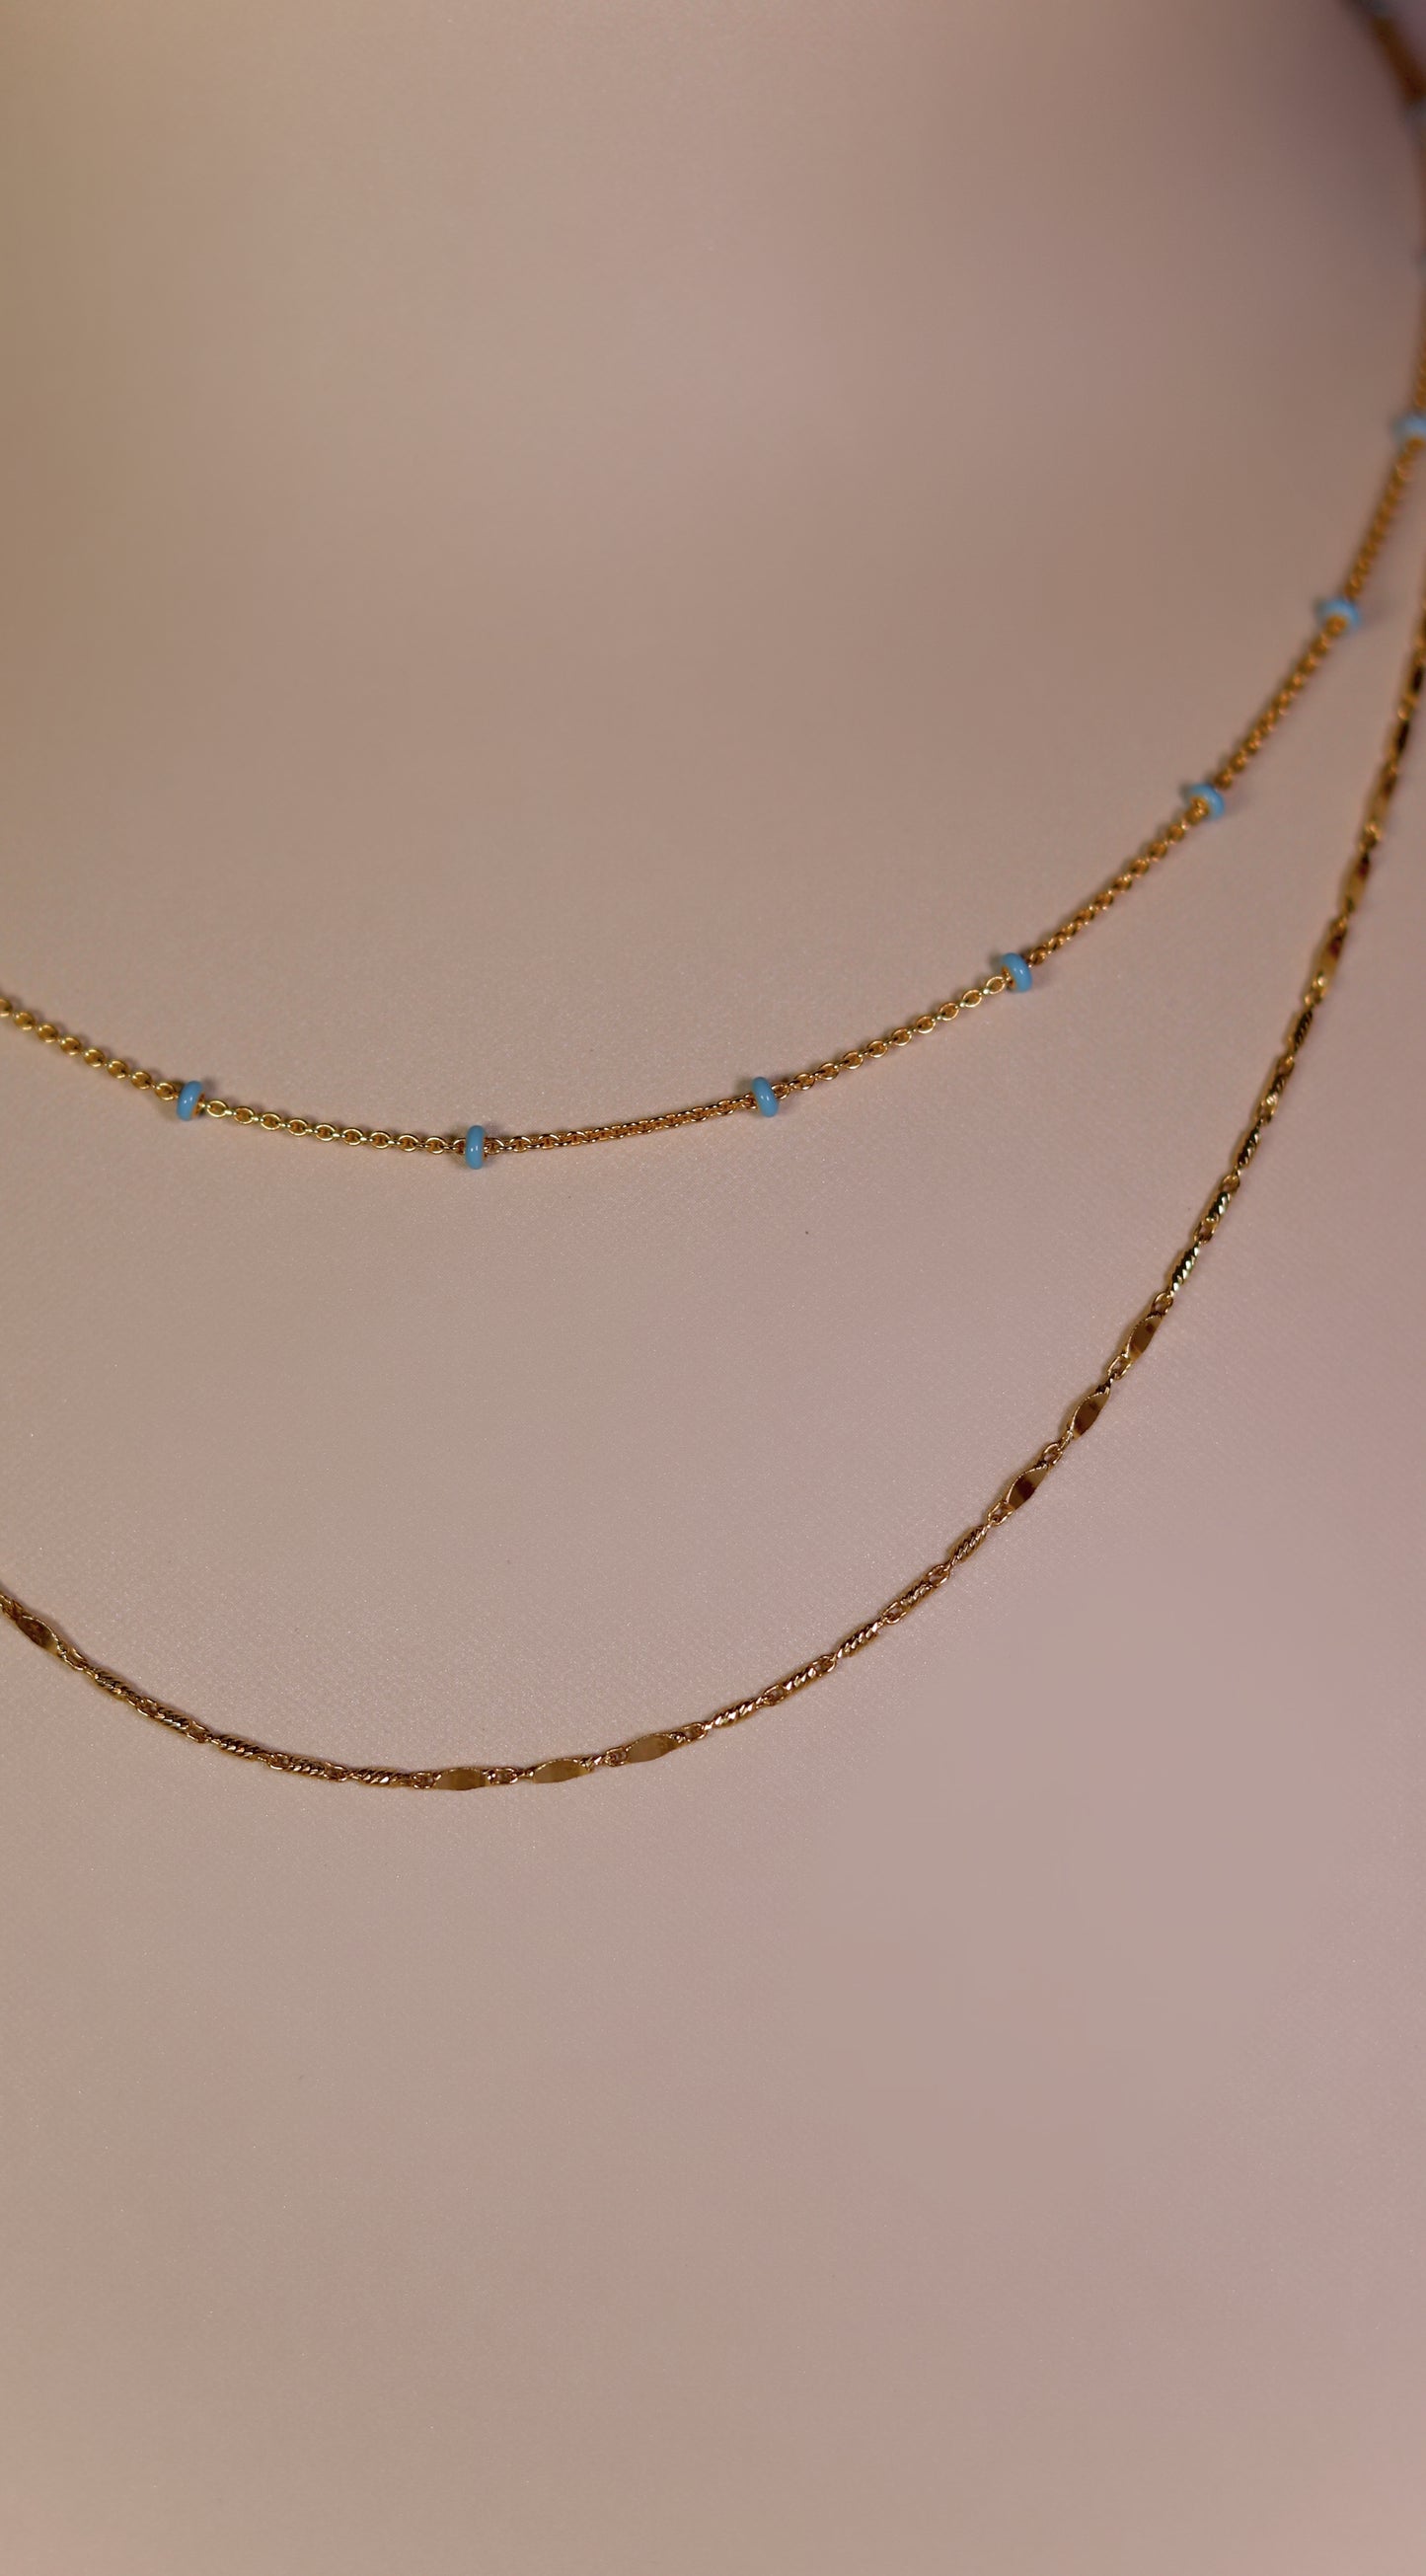 14K Yellow Gold Lumacina Chain With Flat Disc Stations